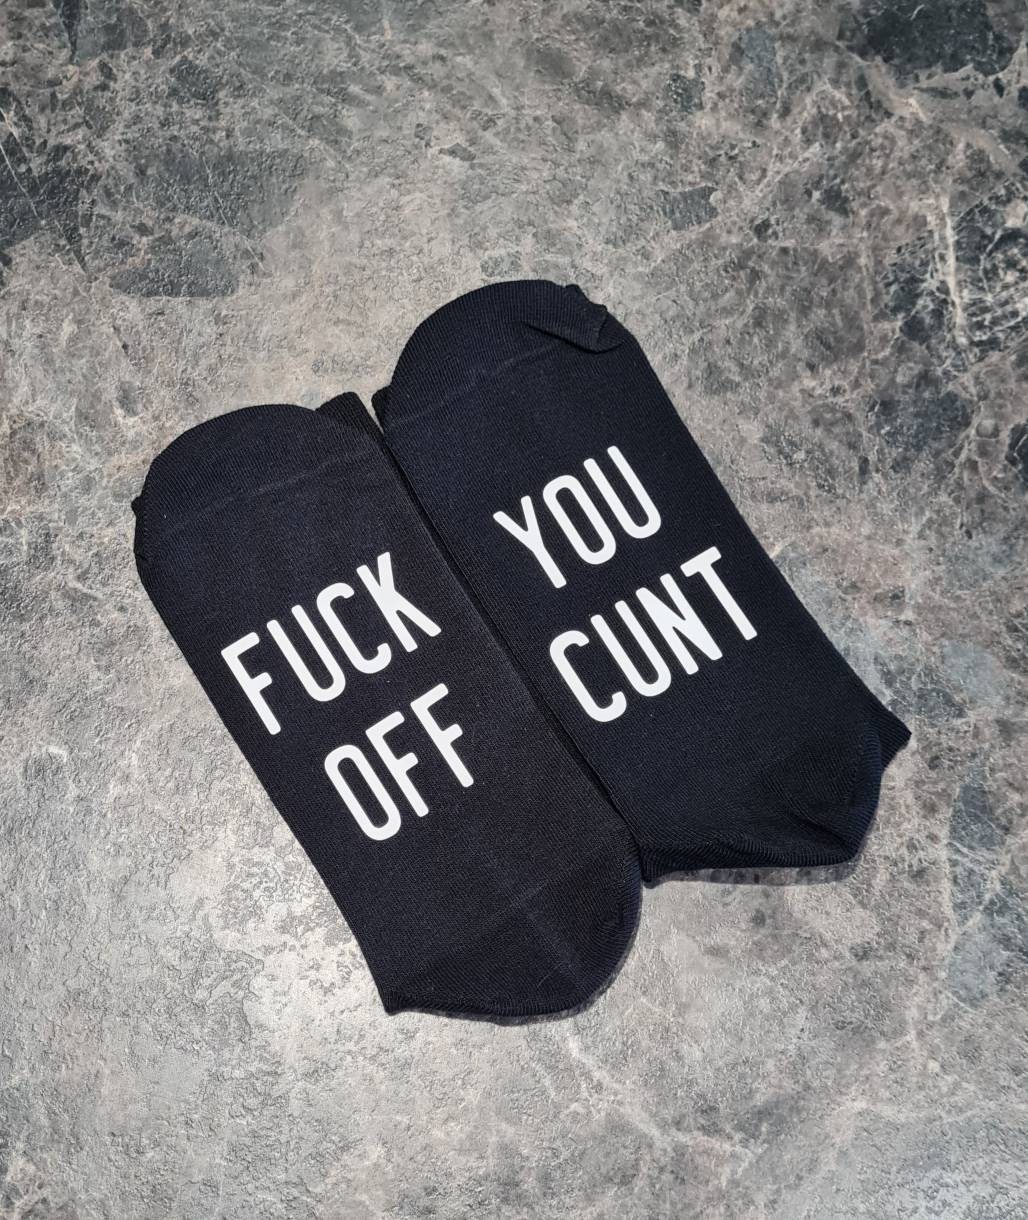 Novelty Socks If You Can Read This, Fuck off You Cunt Socks,funny Socks,  Cunt Gift, Offensive Socks - Etsy